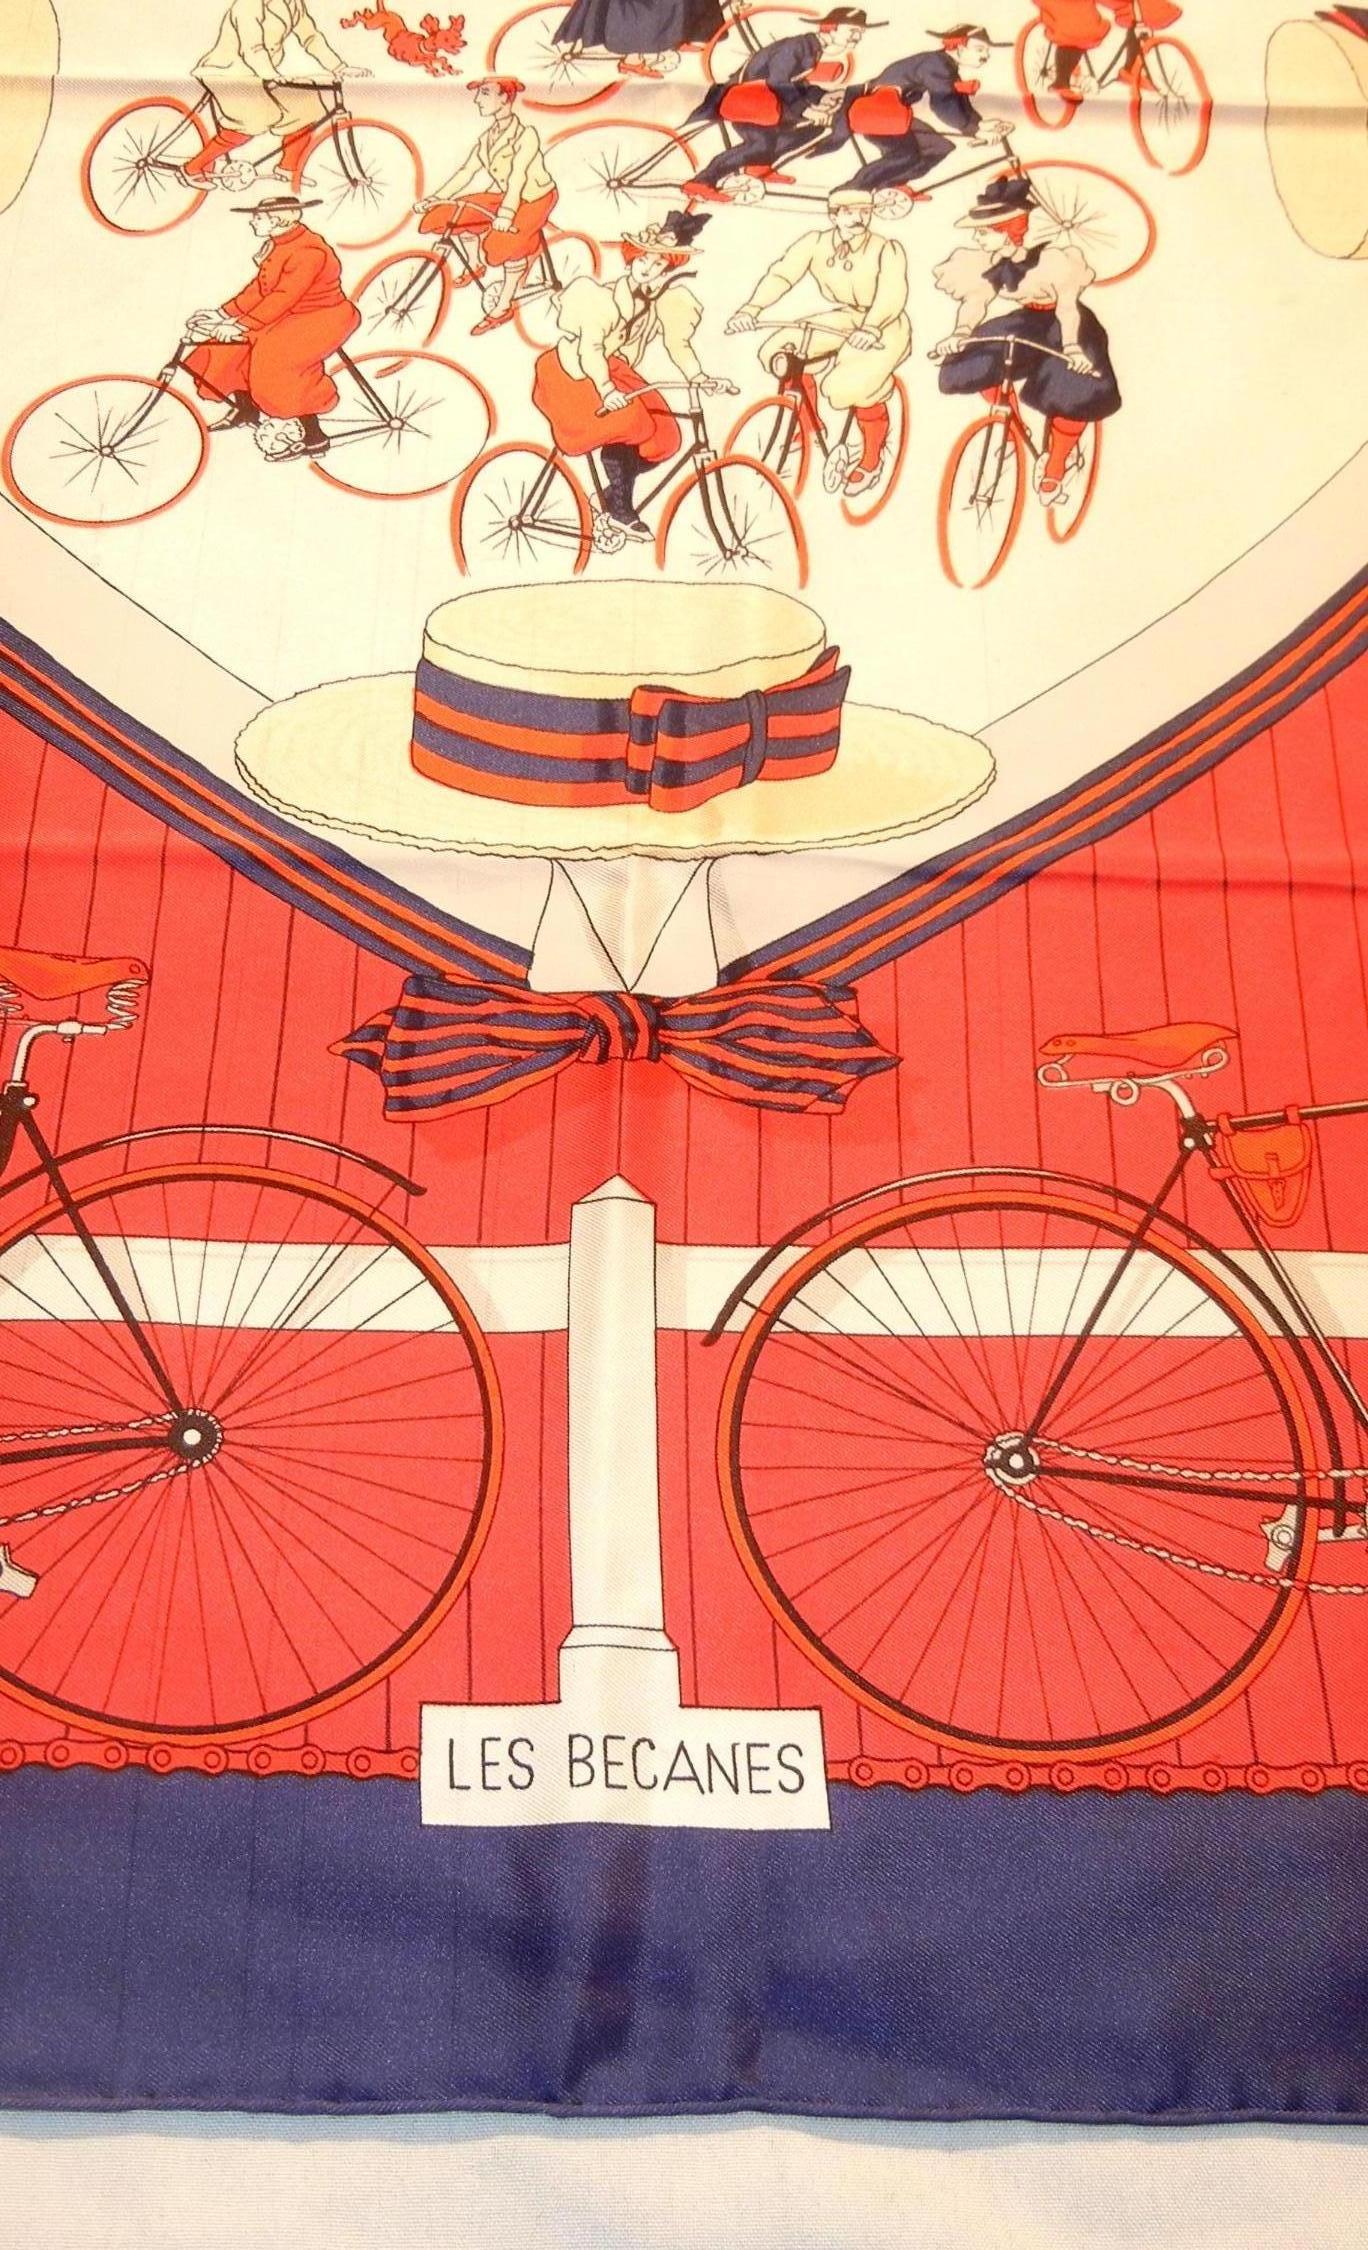 Hermes Les Becanes, the bicyclists, in red, white and blue features a bicycle scene from the early 1900’s.  Hugo Grygkar created  Les Becanes in 1954 and Hermes re-issued it  in 1973.  Scarf design is ornate with a wide blue outer border with hand